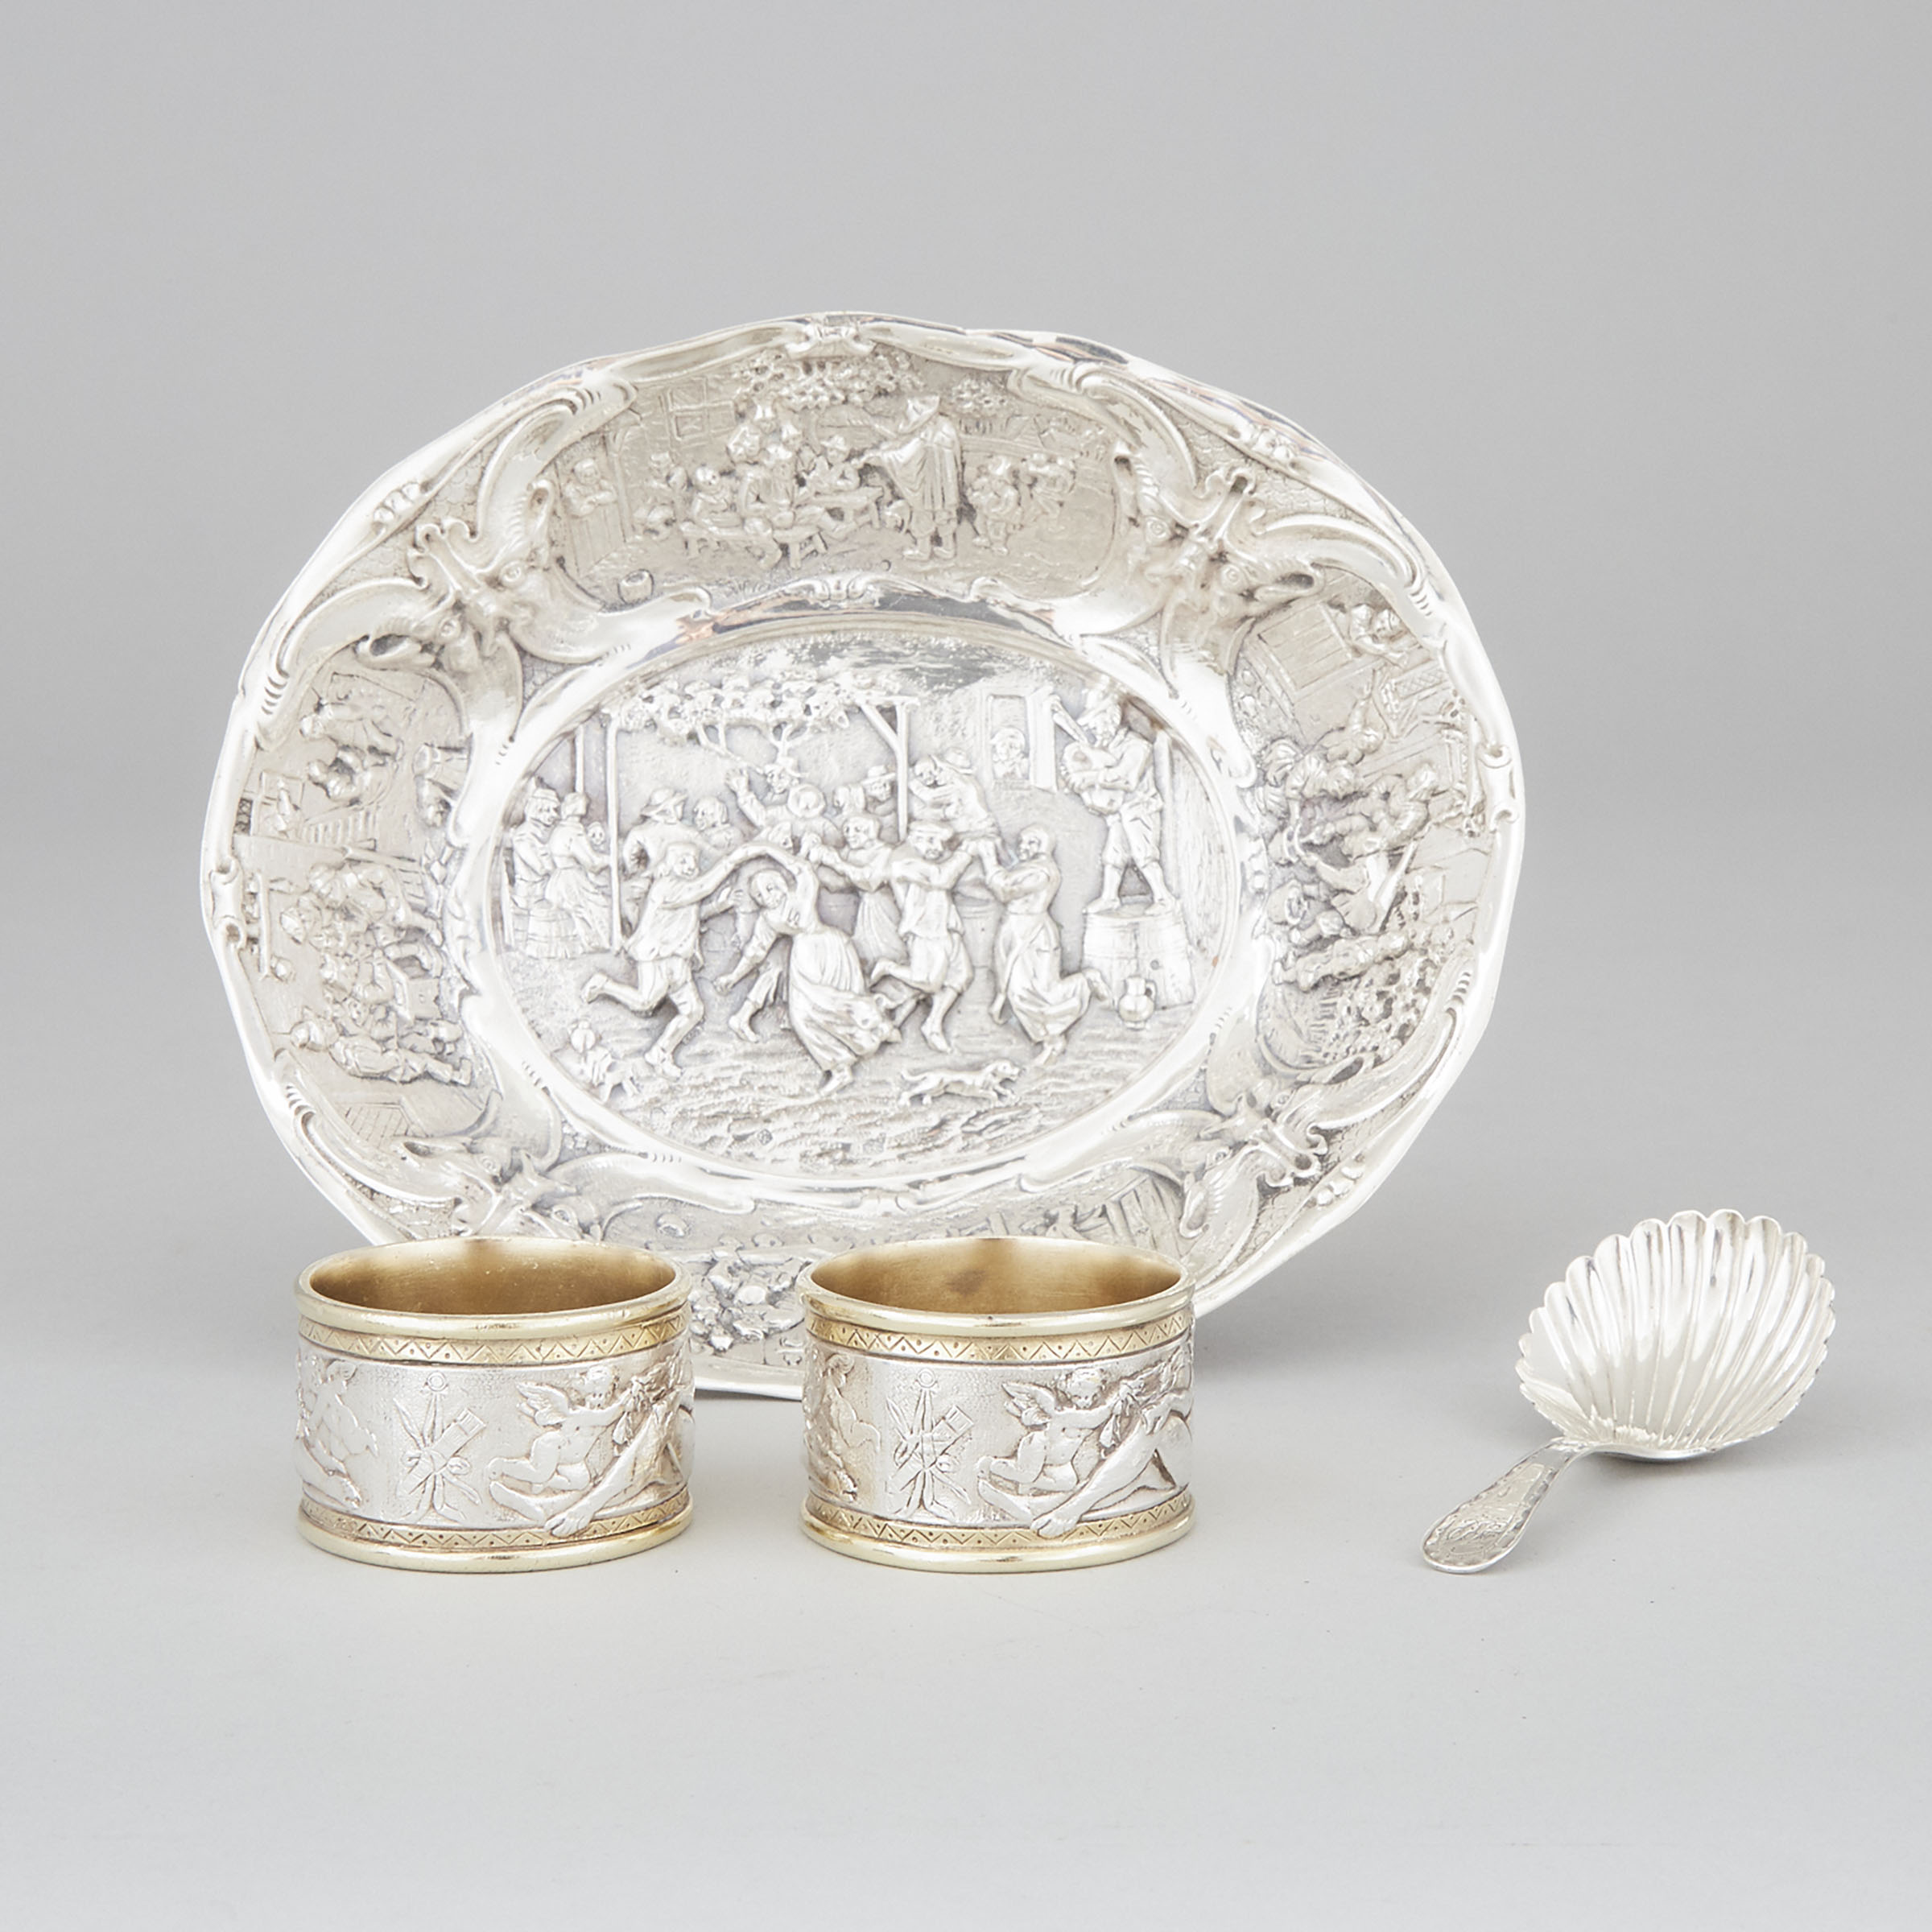 George III Silver Caddy Spoon, John Emes, London, c.1800, Later Dutch Silver Oval Dish and a Cased Pair of Silver Plated Napkin Rings, Elkington & Co. late 19th century